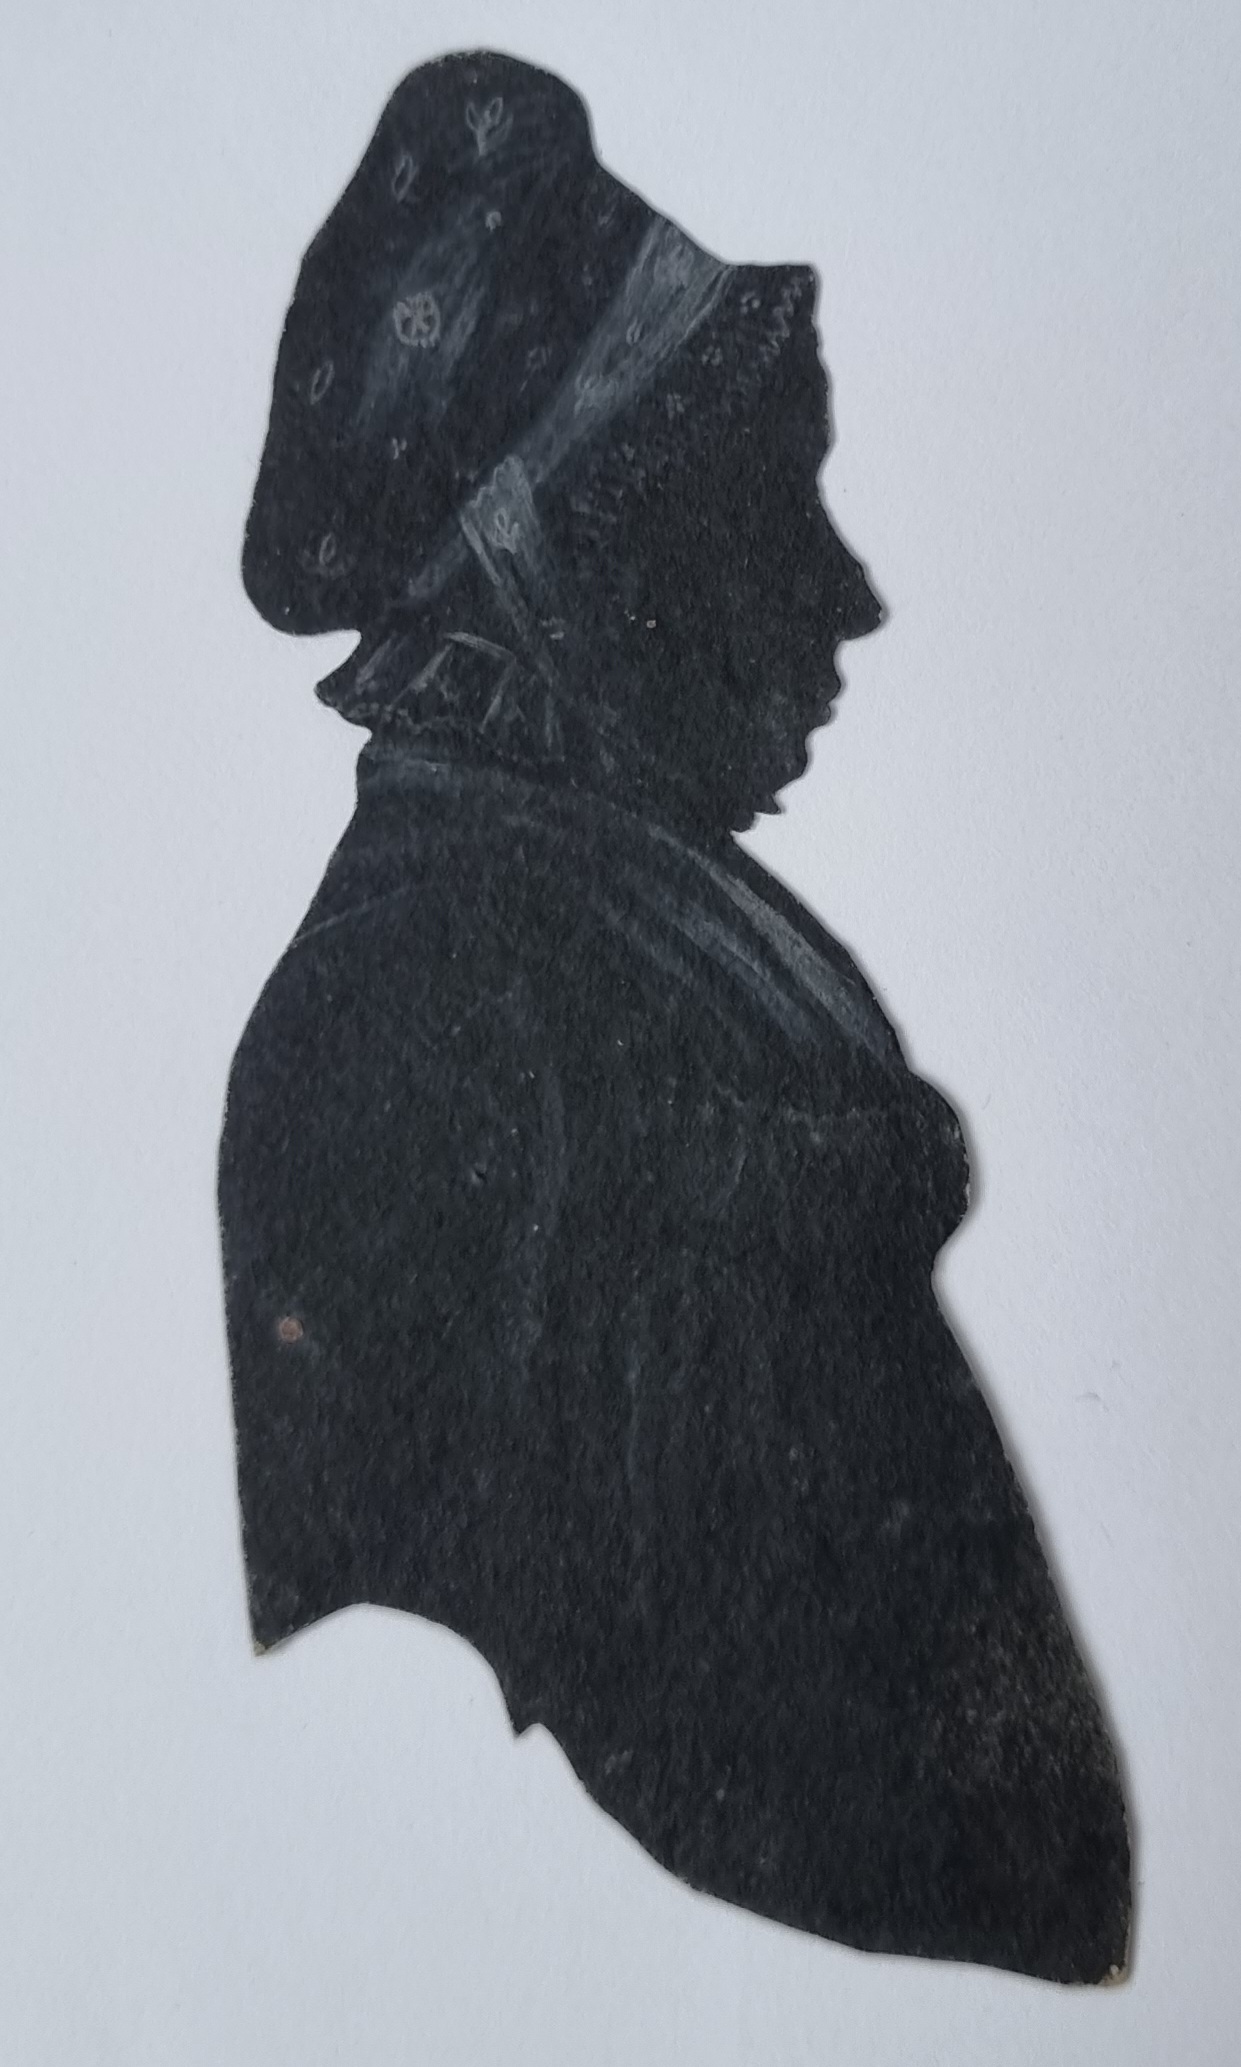 [Silhouette portraits] A woman with cap and a man, late 18th / early 19th century.